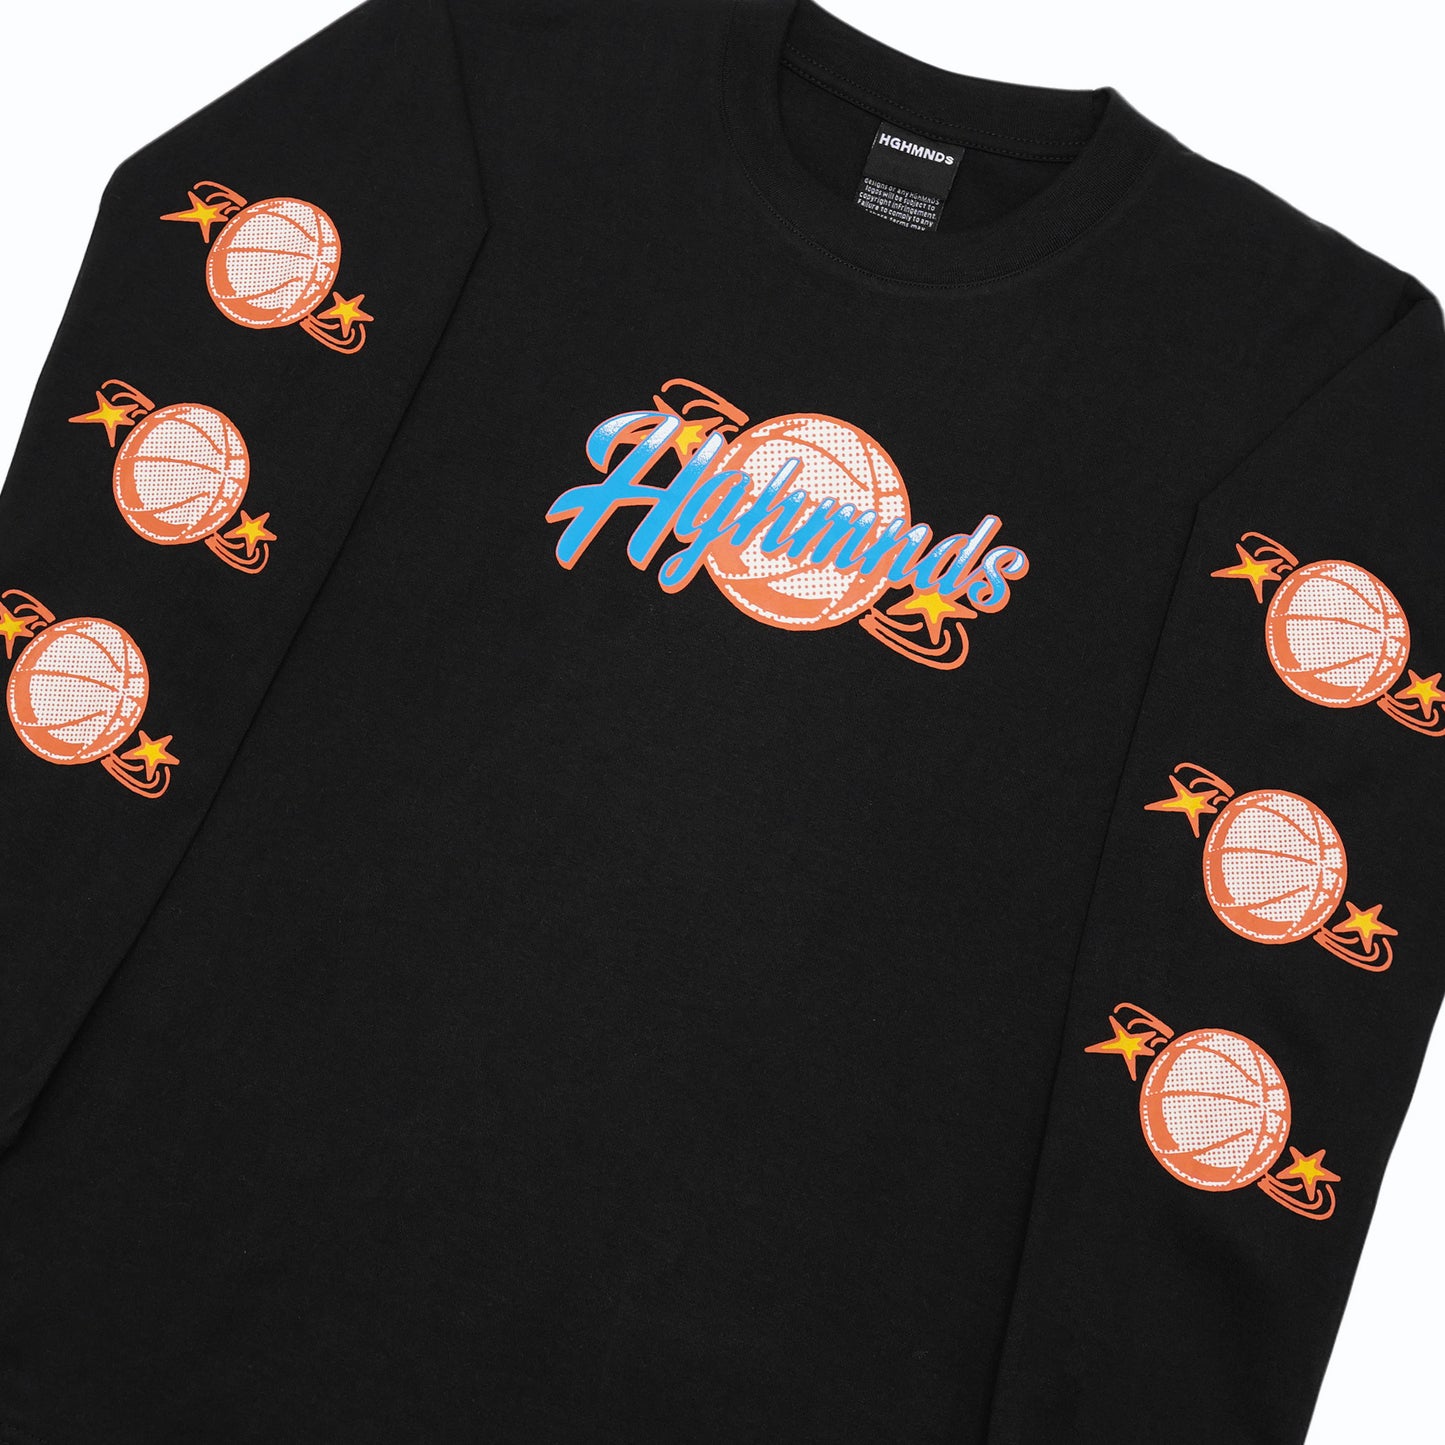 Trophy Owners L/S Tee